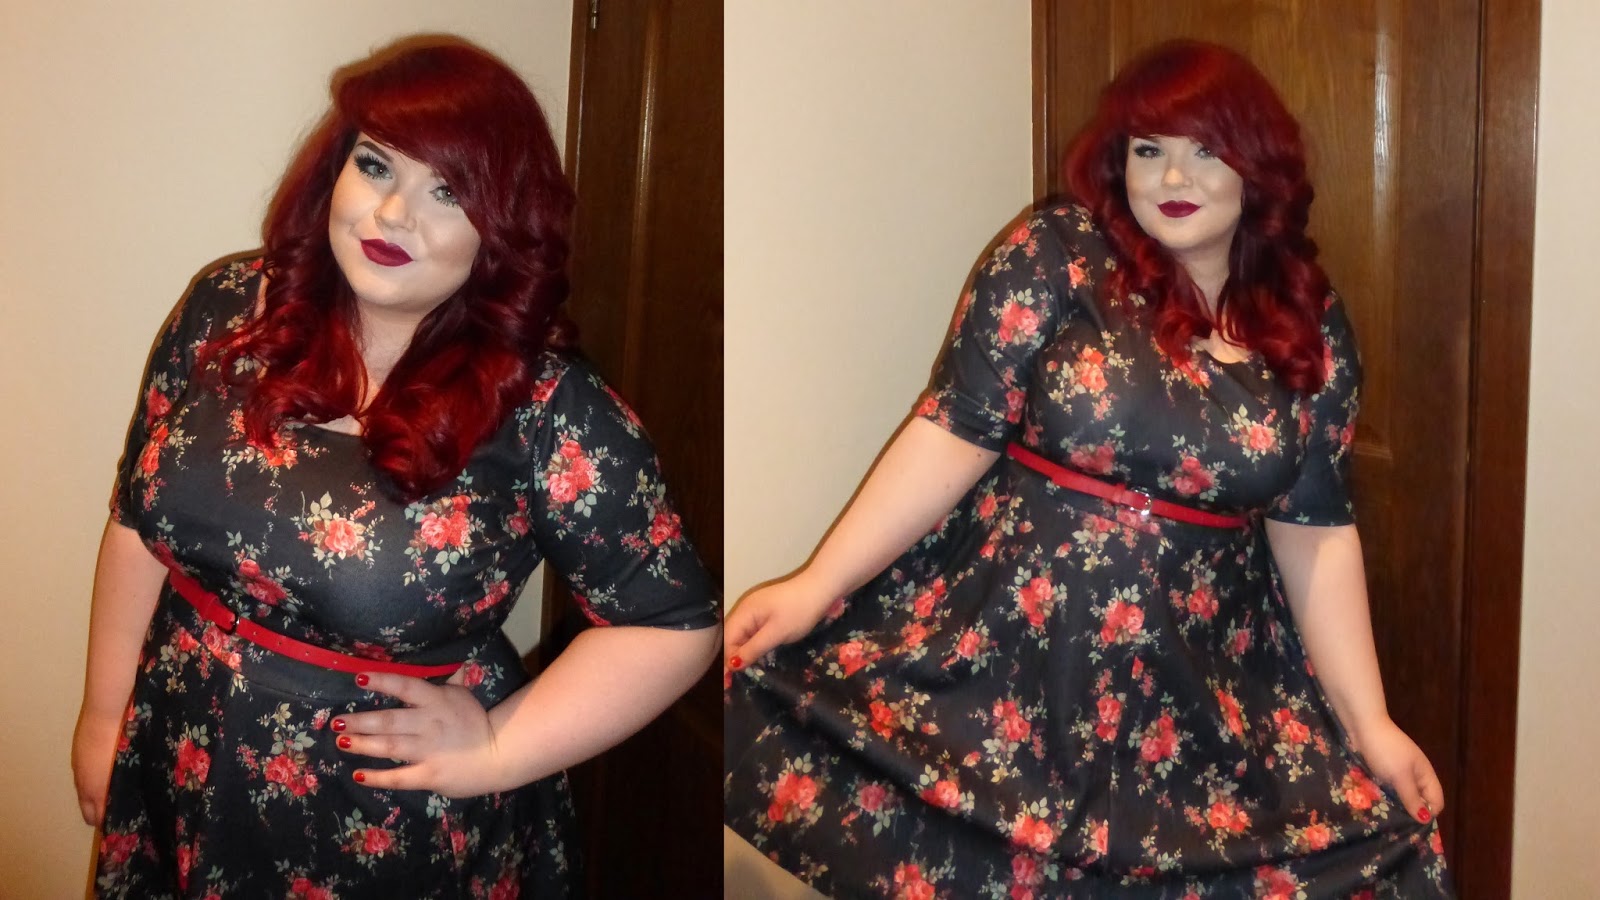 Boohoo Plus Size Range Review - She Might Be Loved